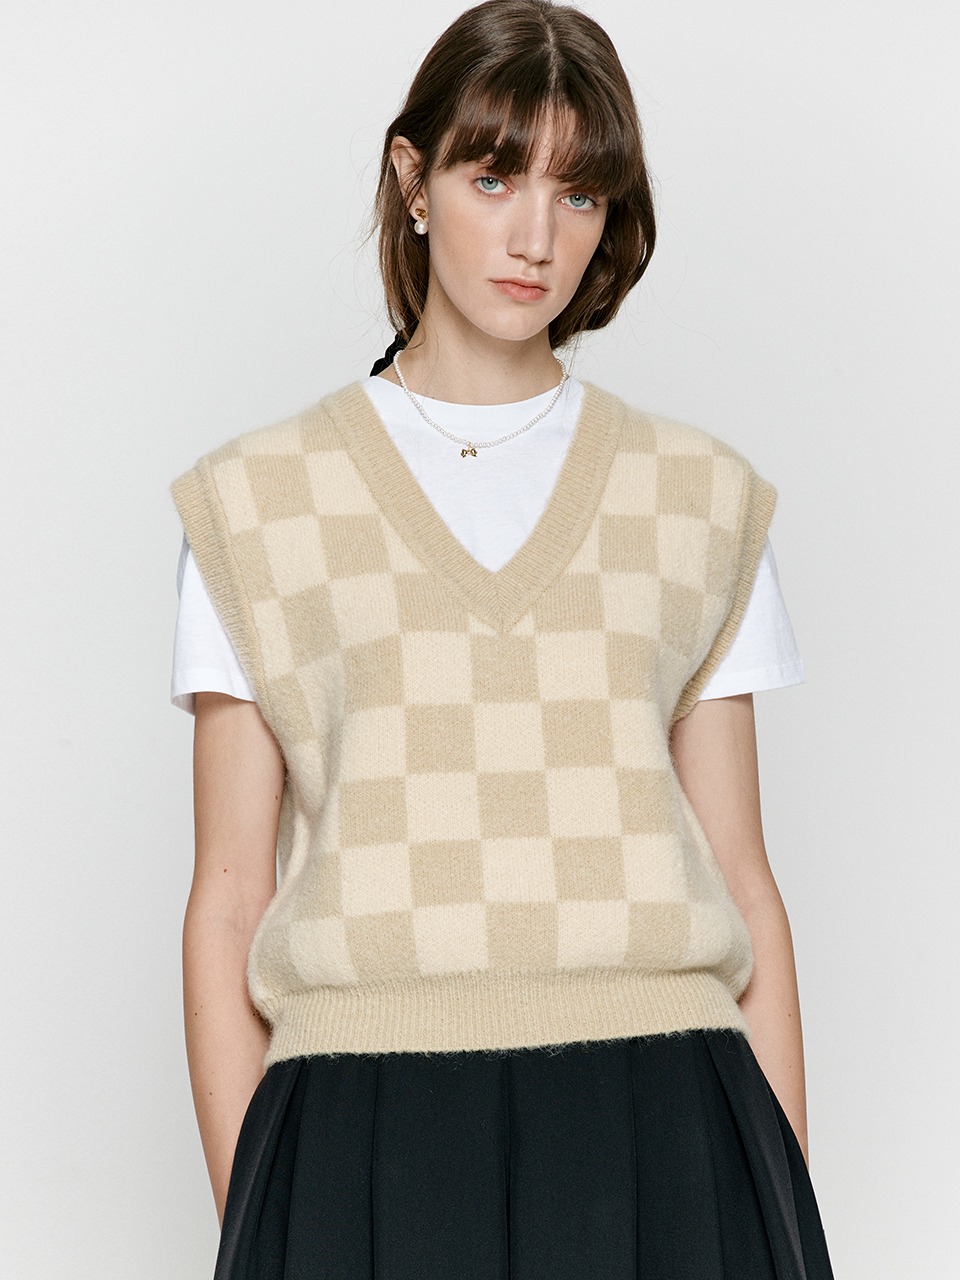 Kid-mohair checkerboard vest - 3colors